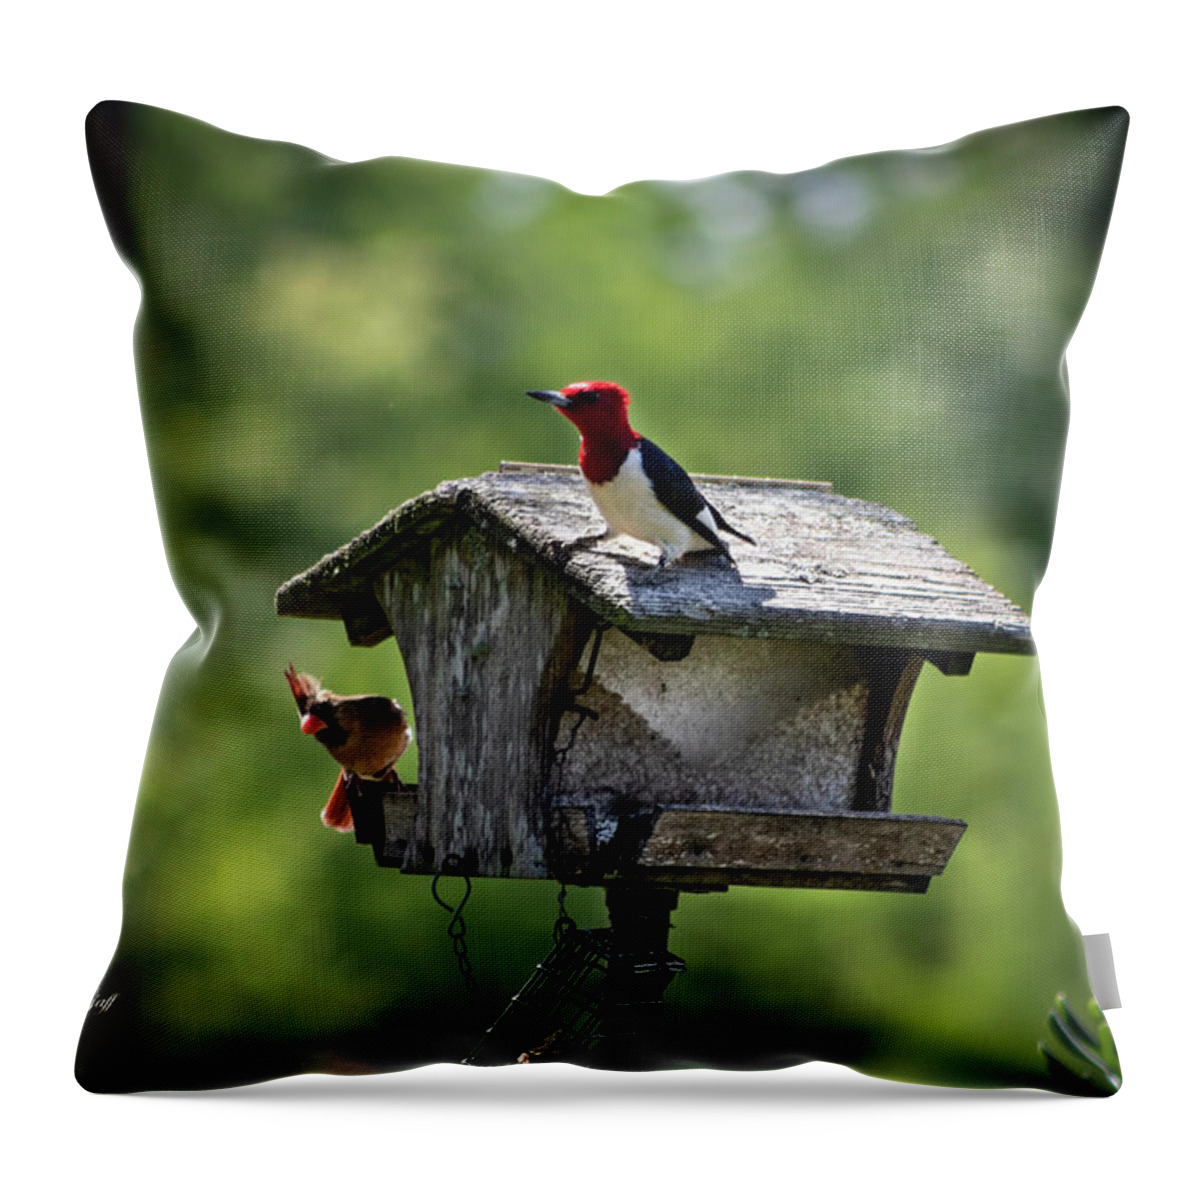 Photograph Throw Pillow featuring the photograph Competing for Food by Suzanne Gaff